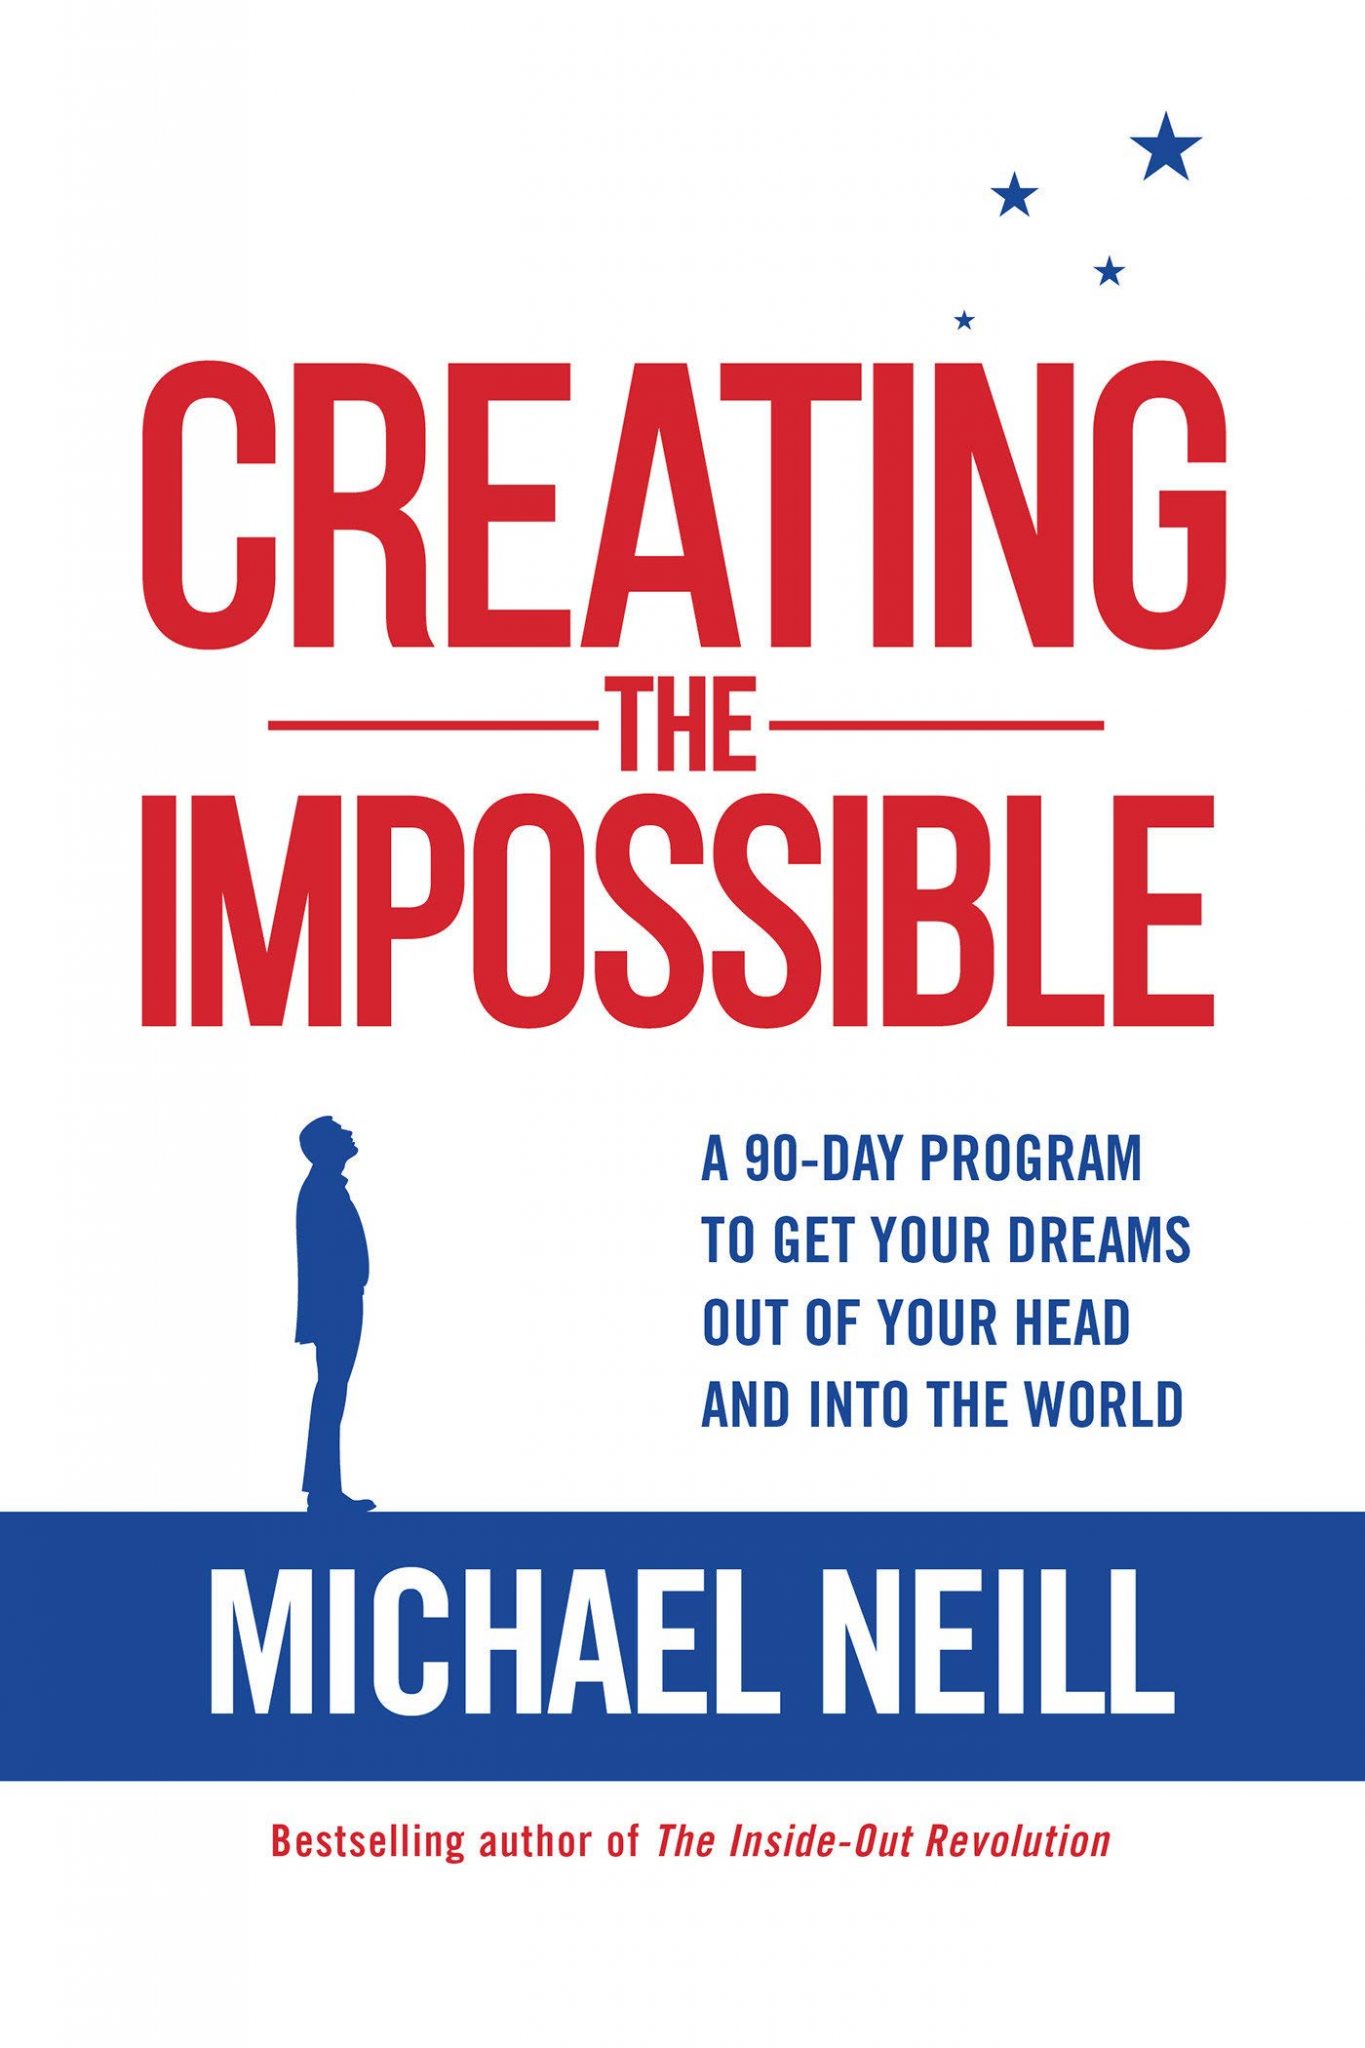 “Creating the Impossible”, Michael Neill, Book summary